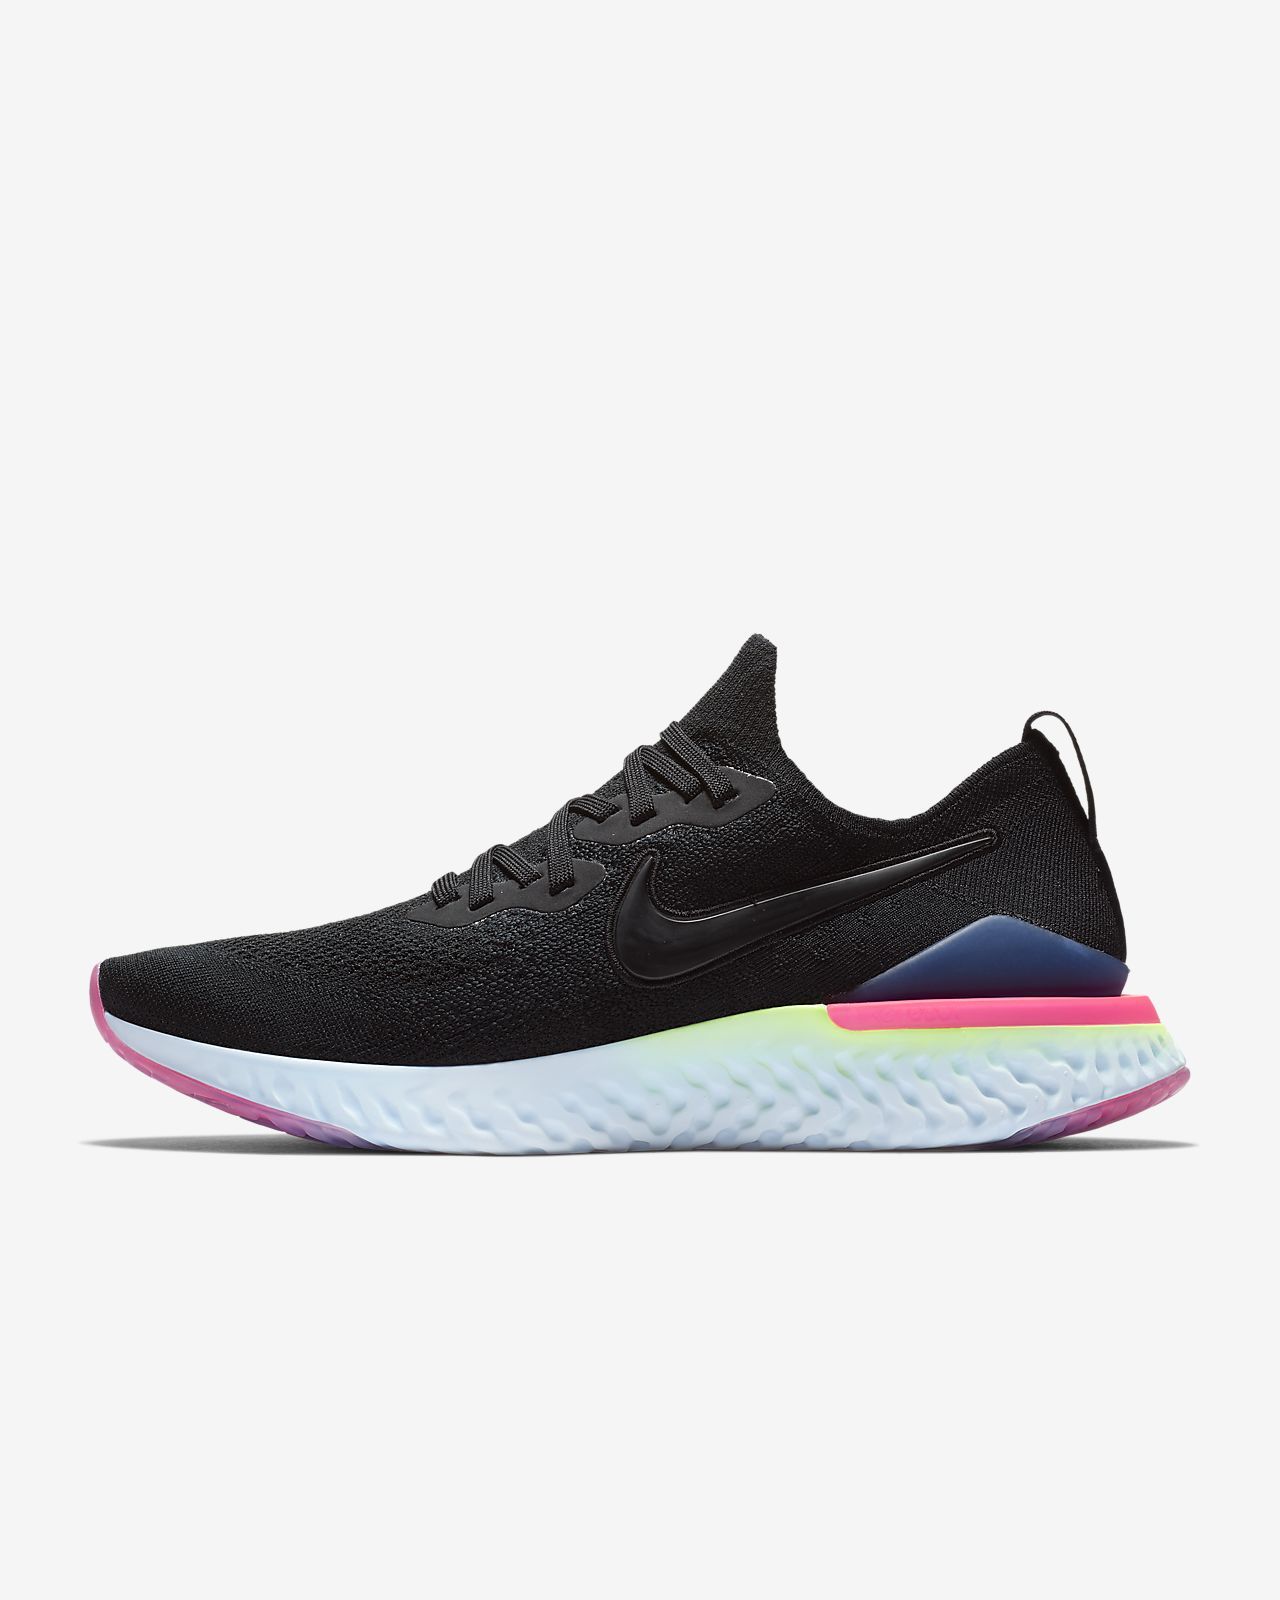 react trainer for sale